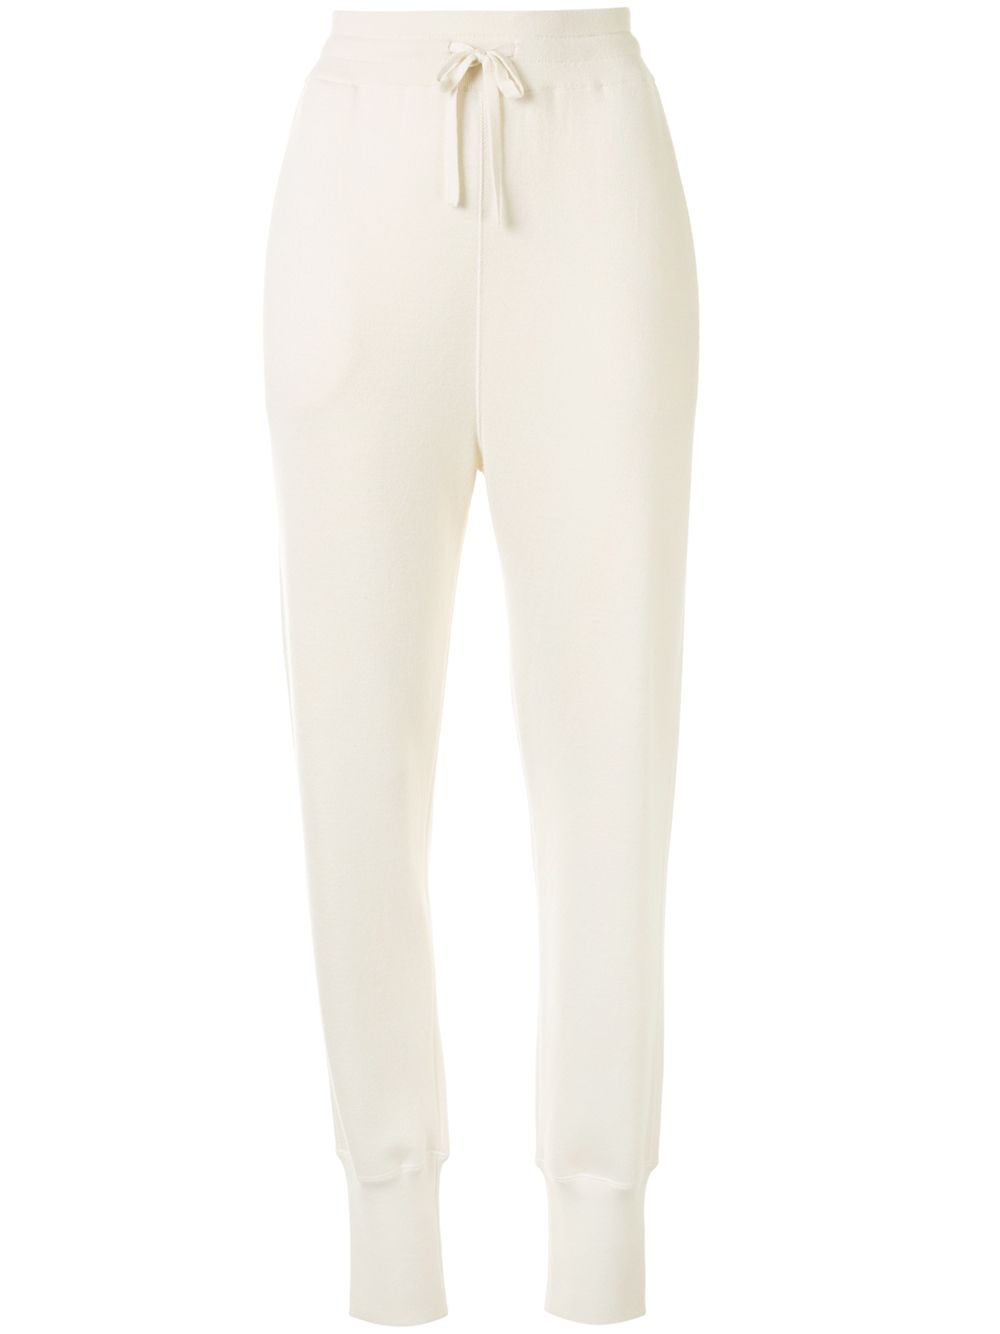 JIL SANDER KNITTED TRACK trousers